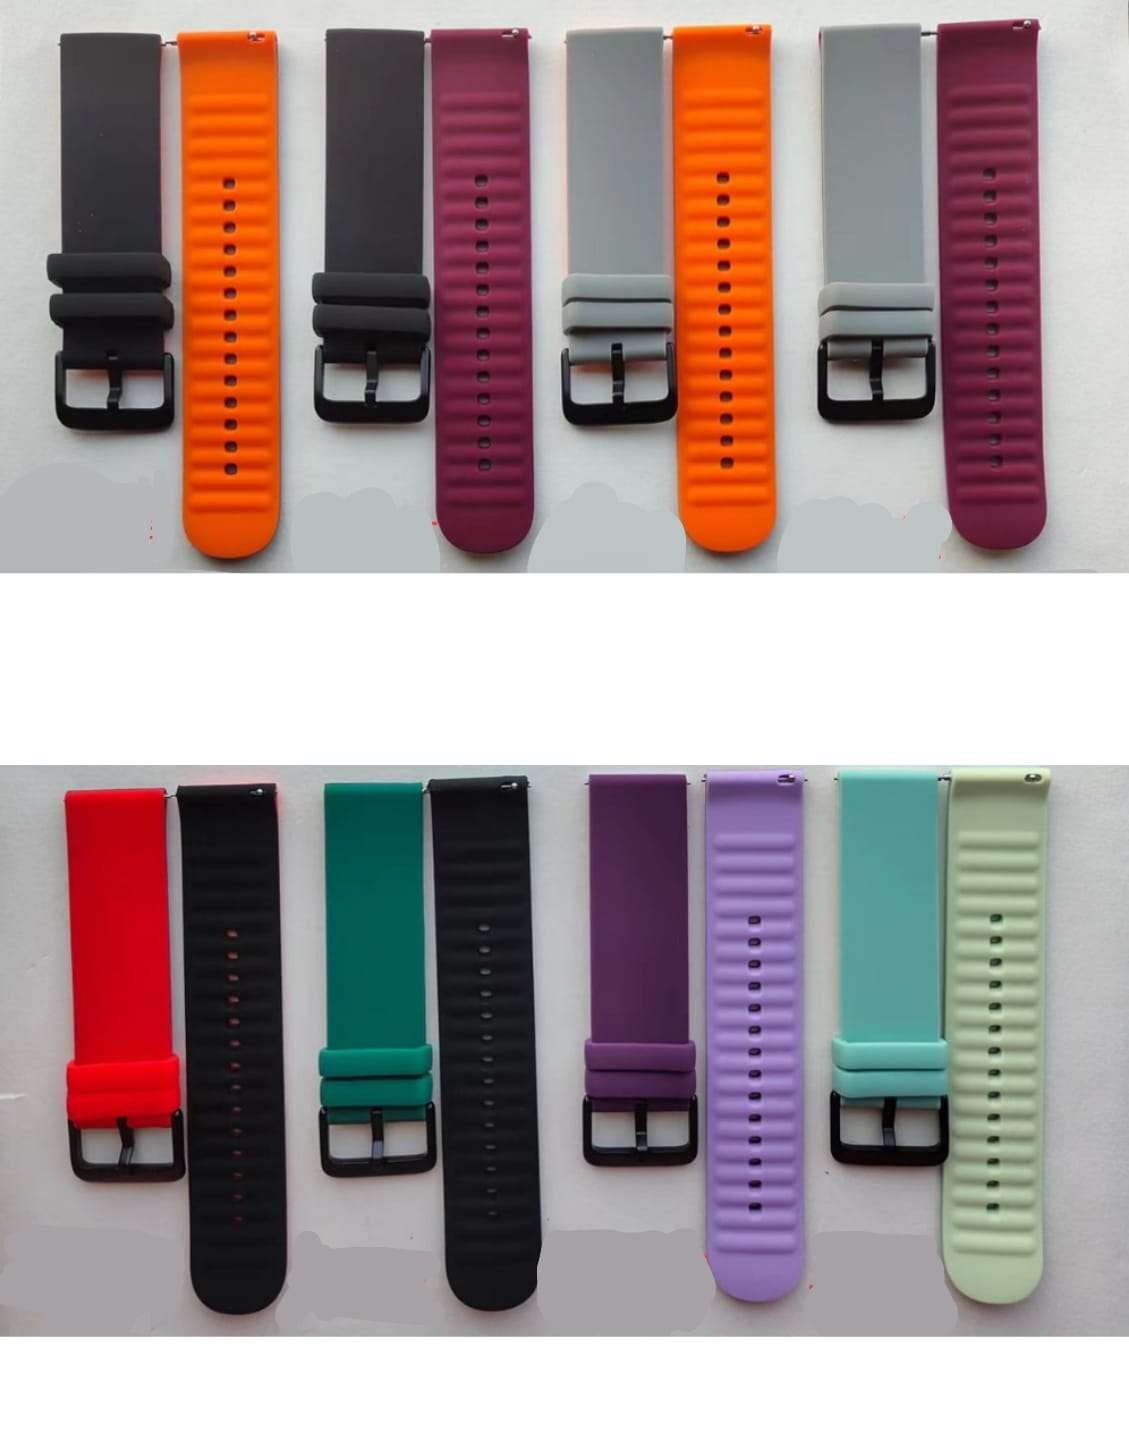 20 MM Grey/Orange Dual Two Color Silicon Watch Bands for Android Smartwatches